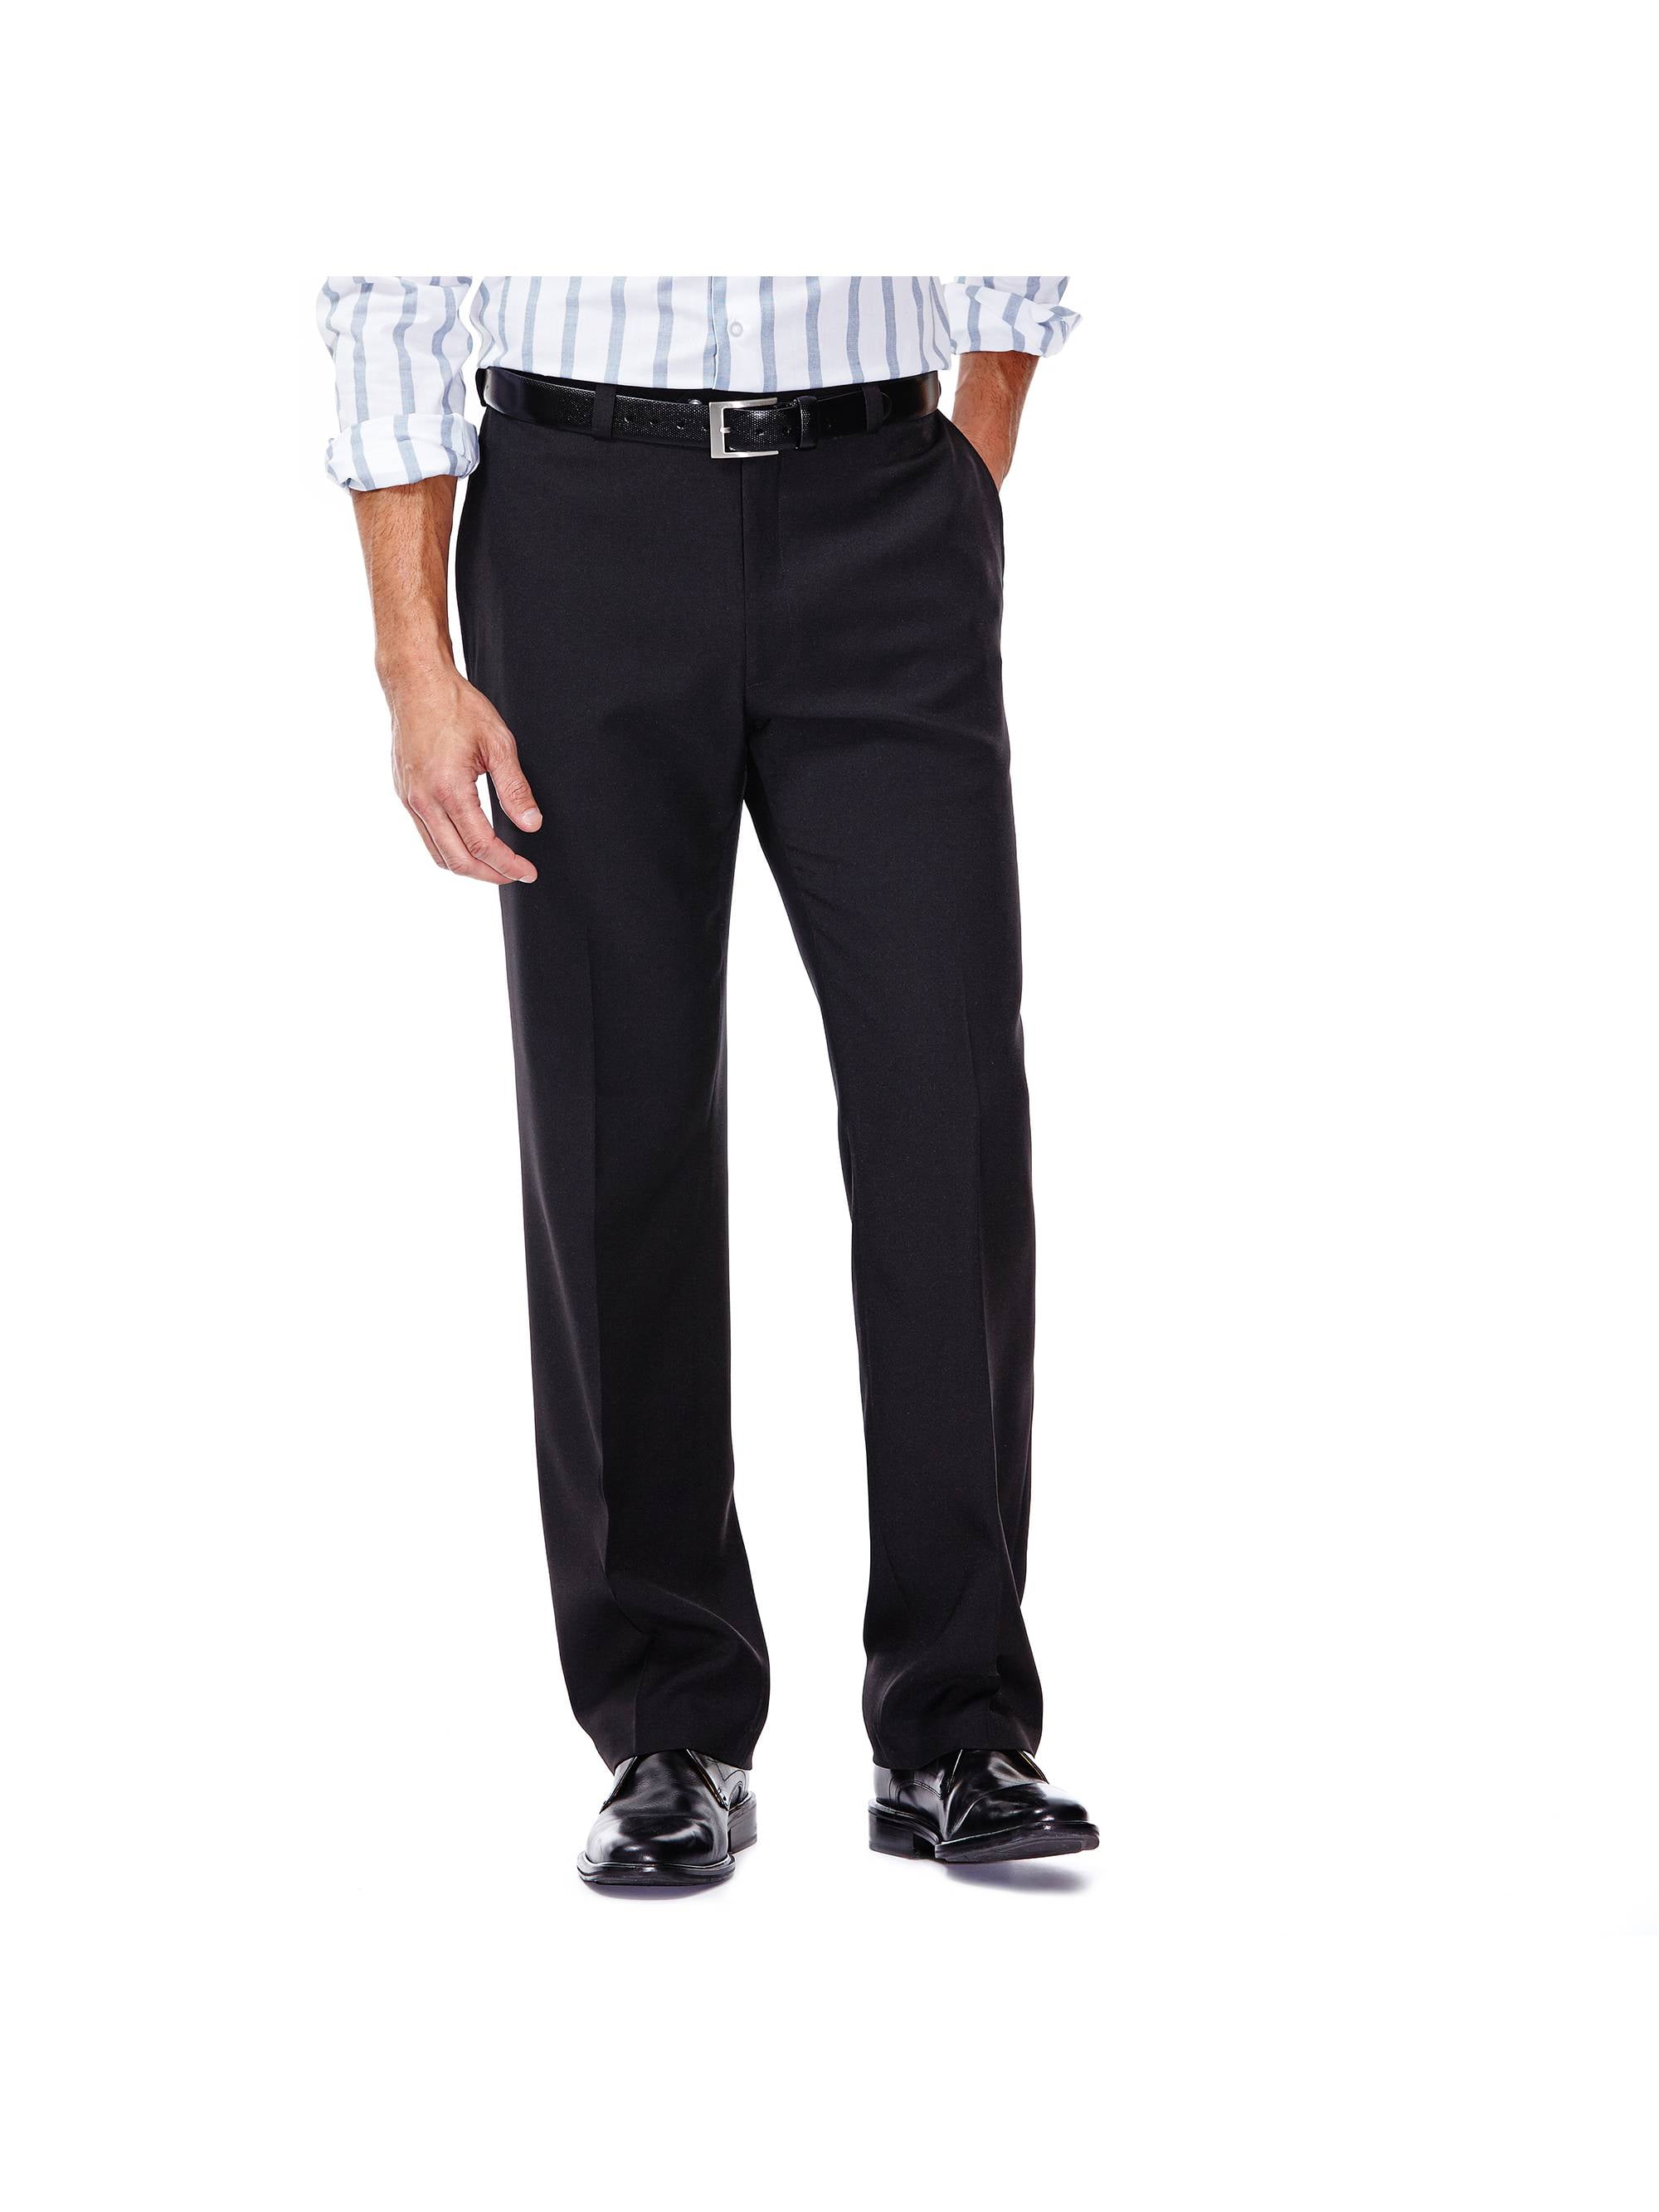 Haggar Mens Stretch Stripe Belted Poplin Classic Fit Flat Front Pant